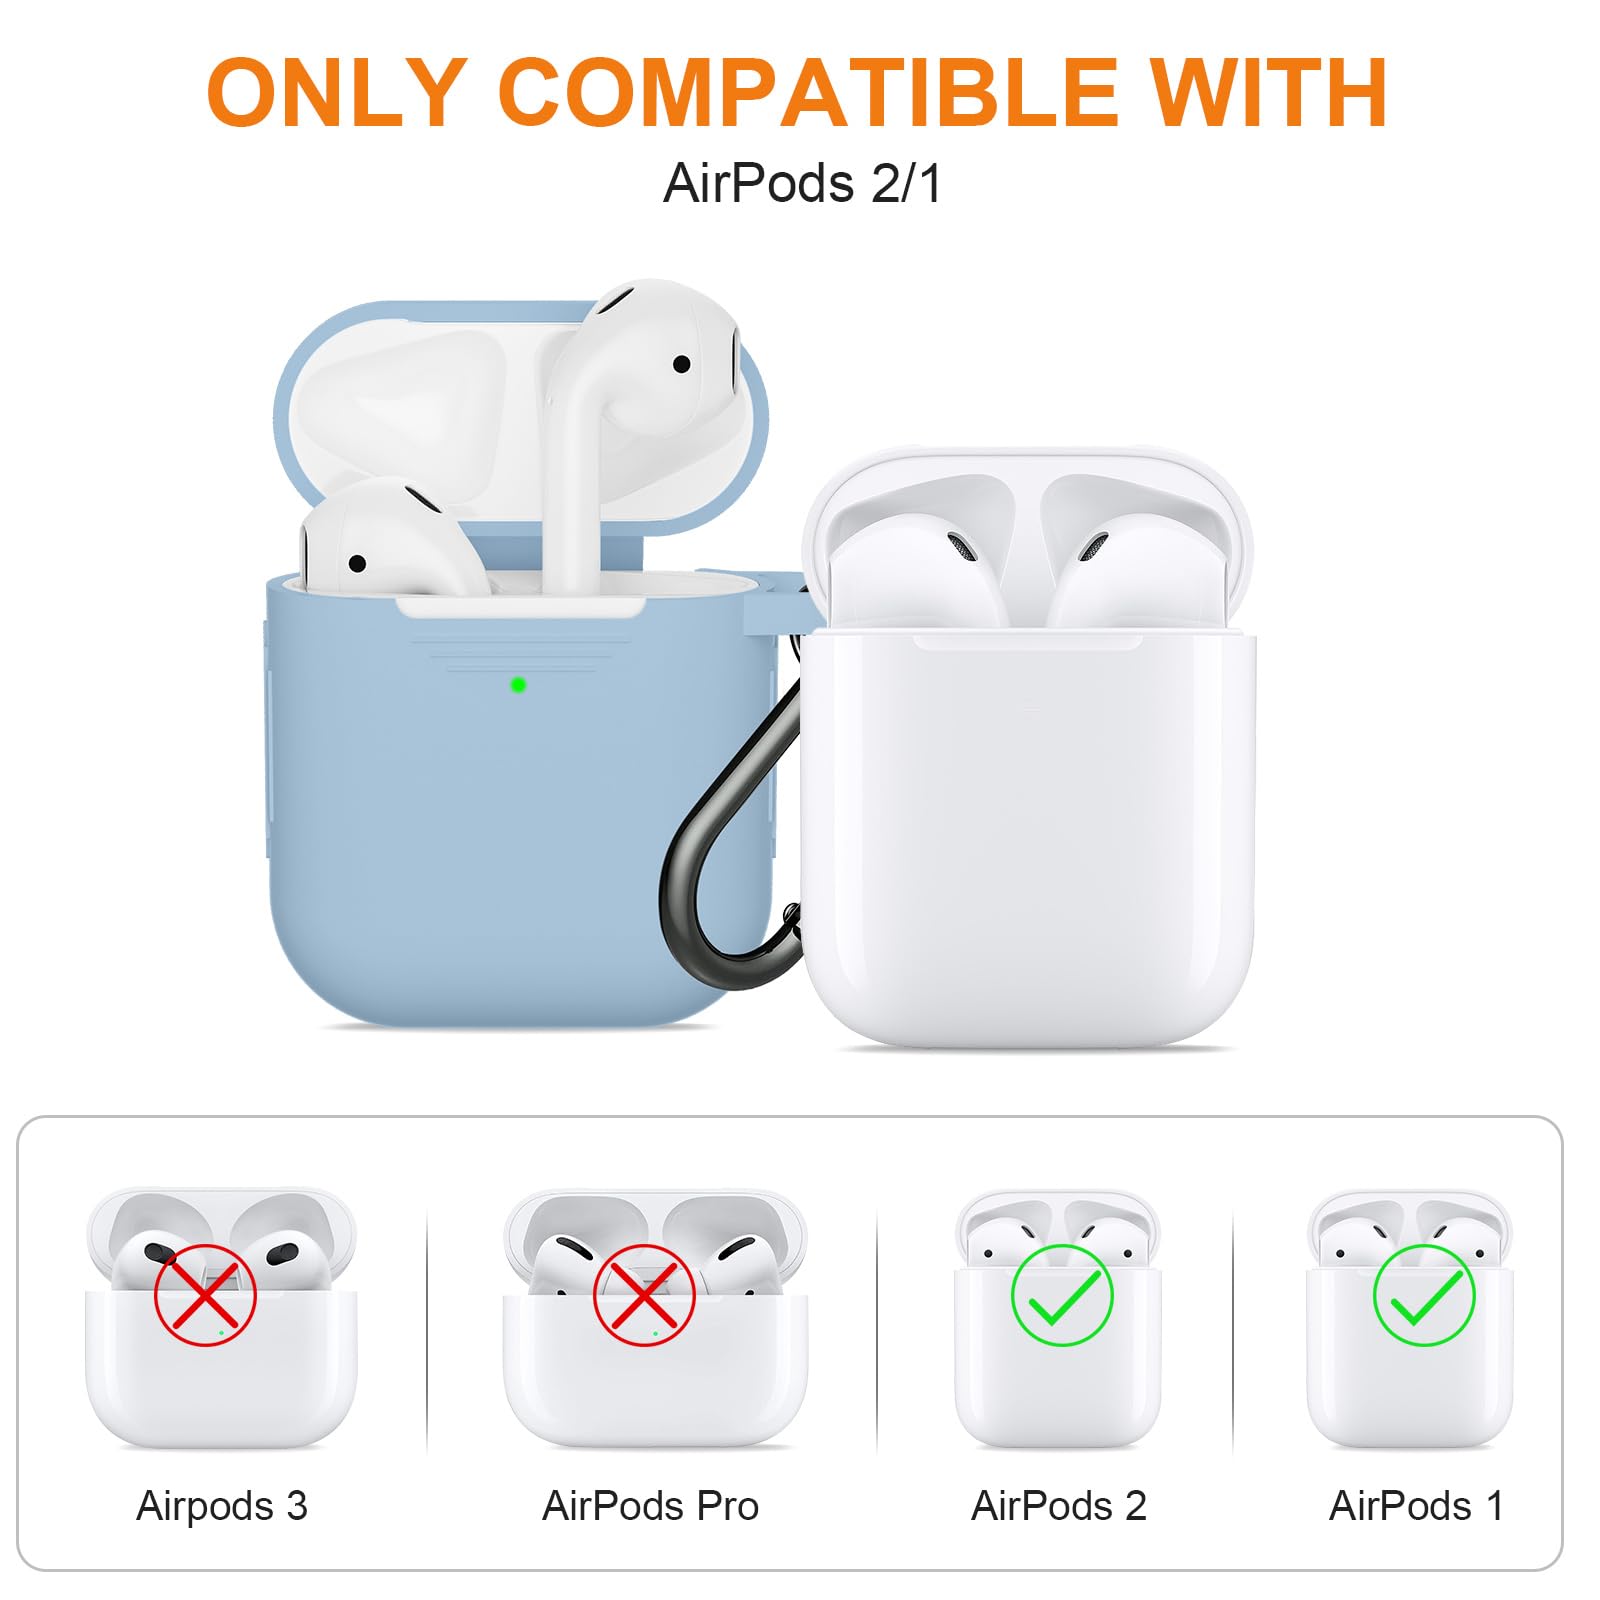 SUPFINE (2 in 1) for Airpod Case Cover, Soft Silicone Protective and Airpod Cleaner Kit Compatible with Airpods 2nd Generation Charging Case (Sky Blue)